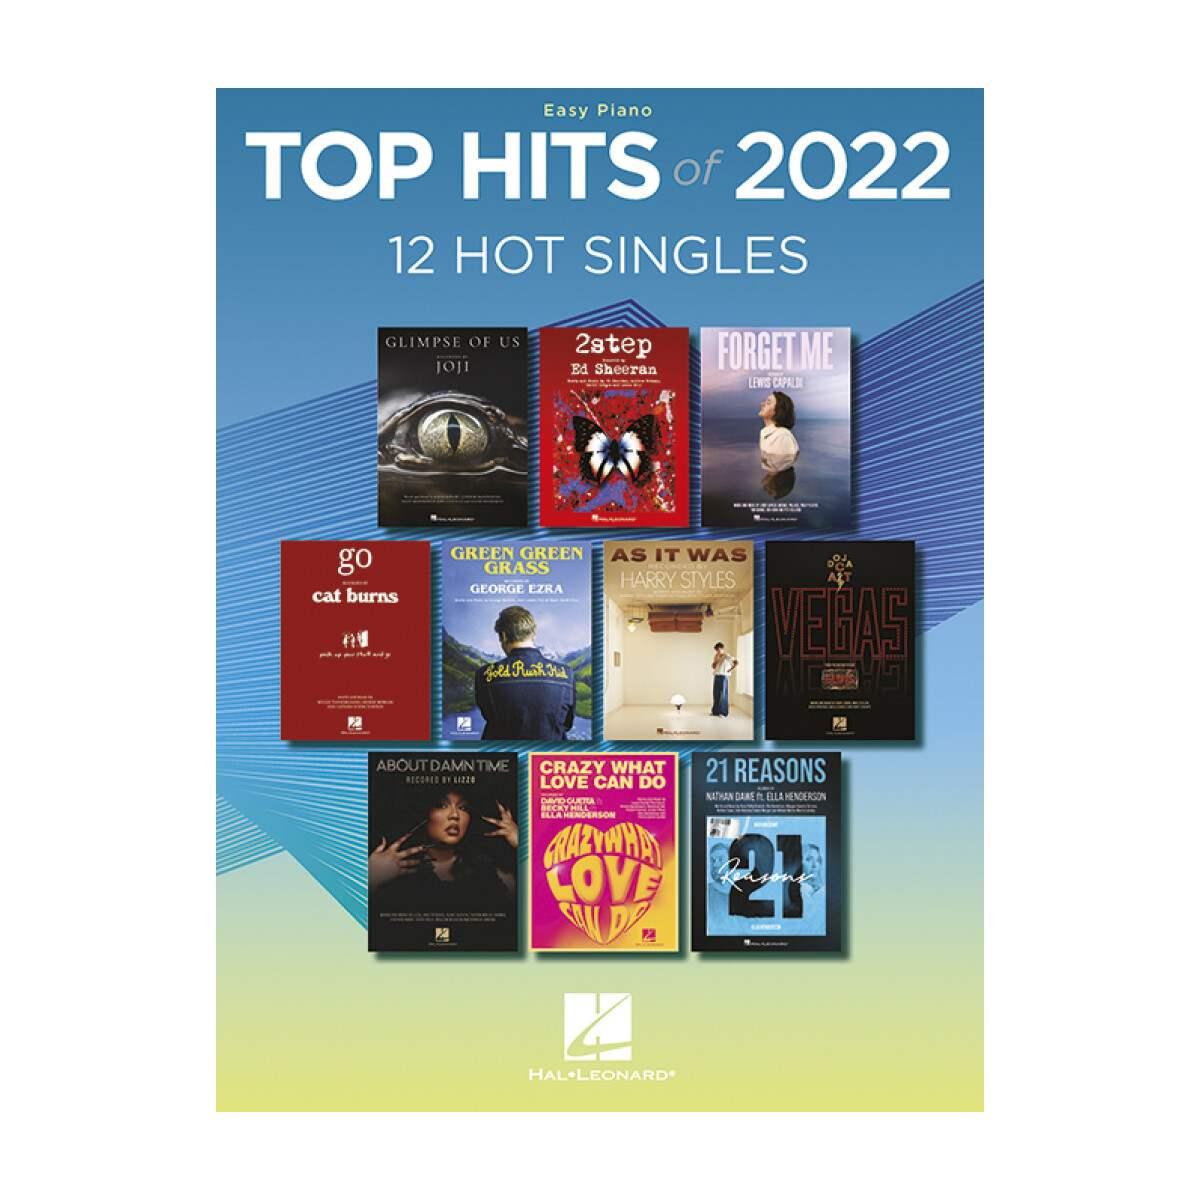 Top hits of 2022